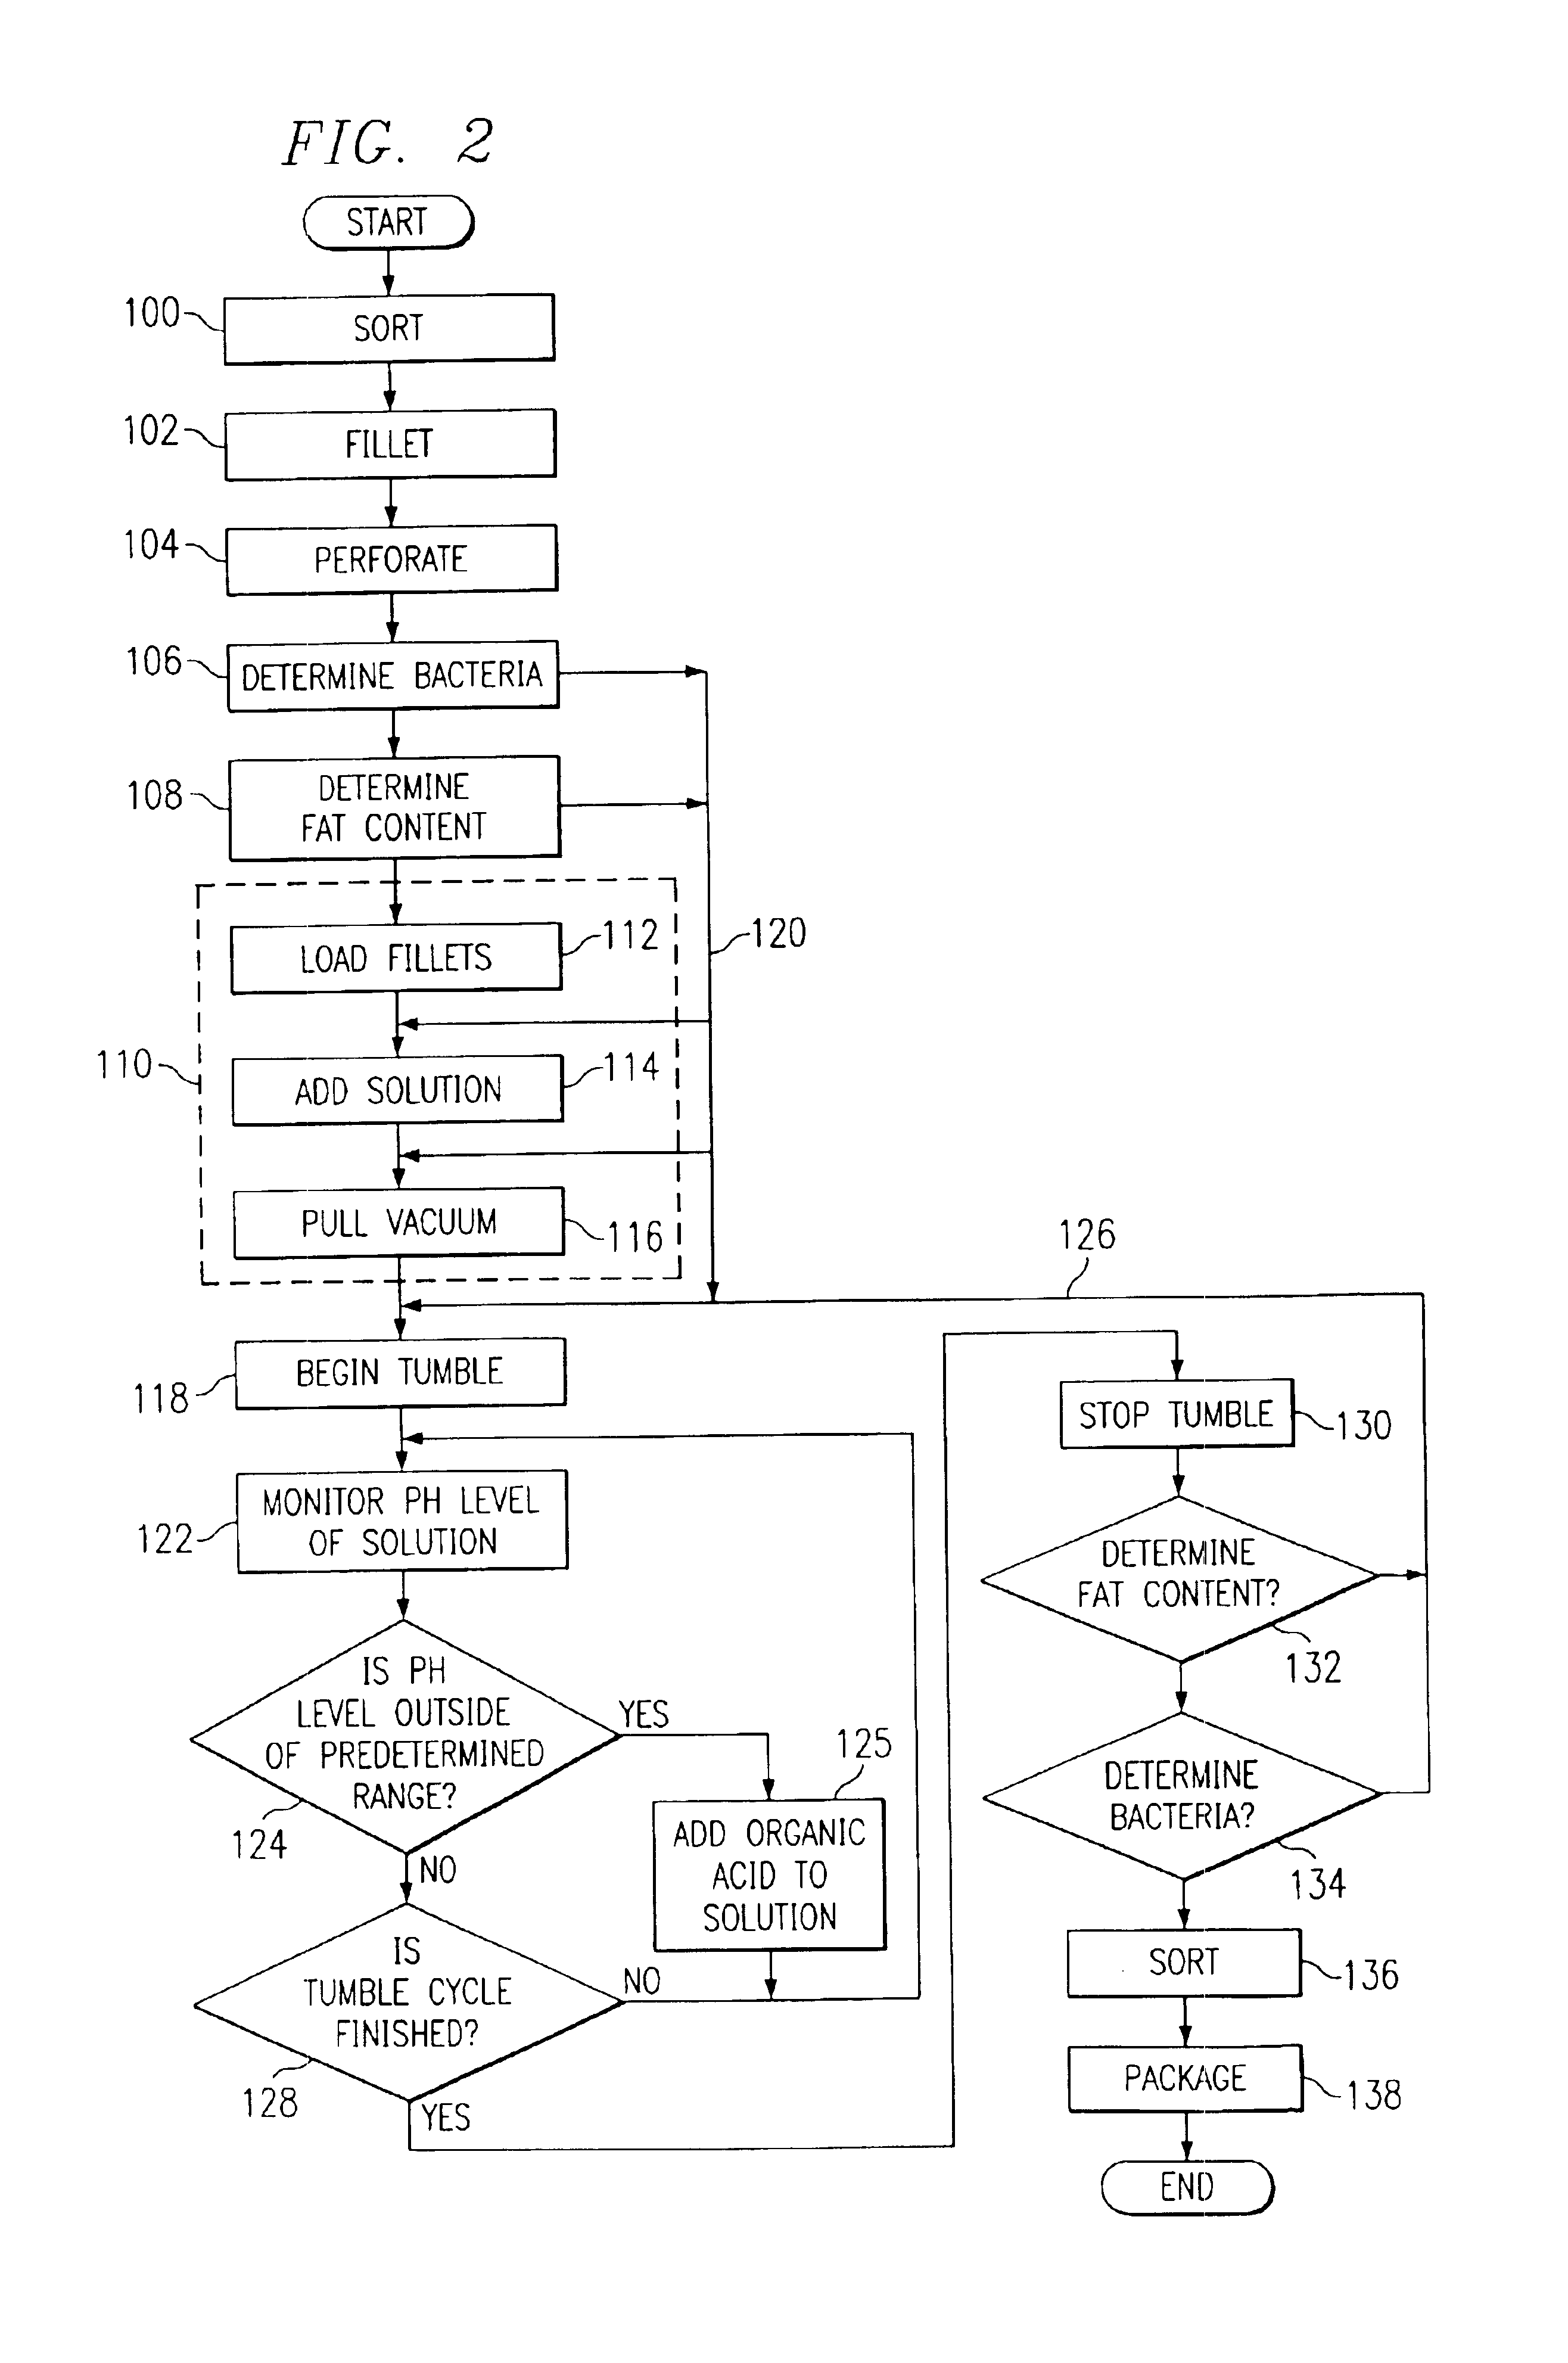 Method of reducing bacteria and fat content of food products